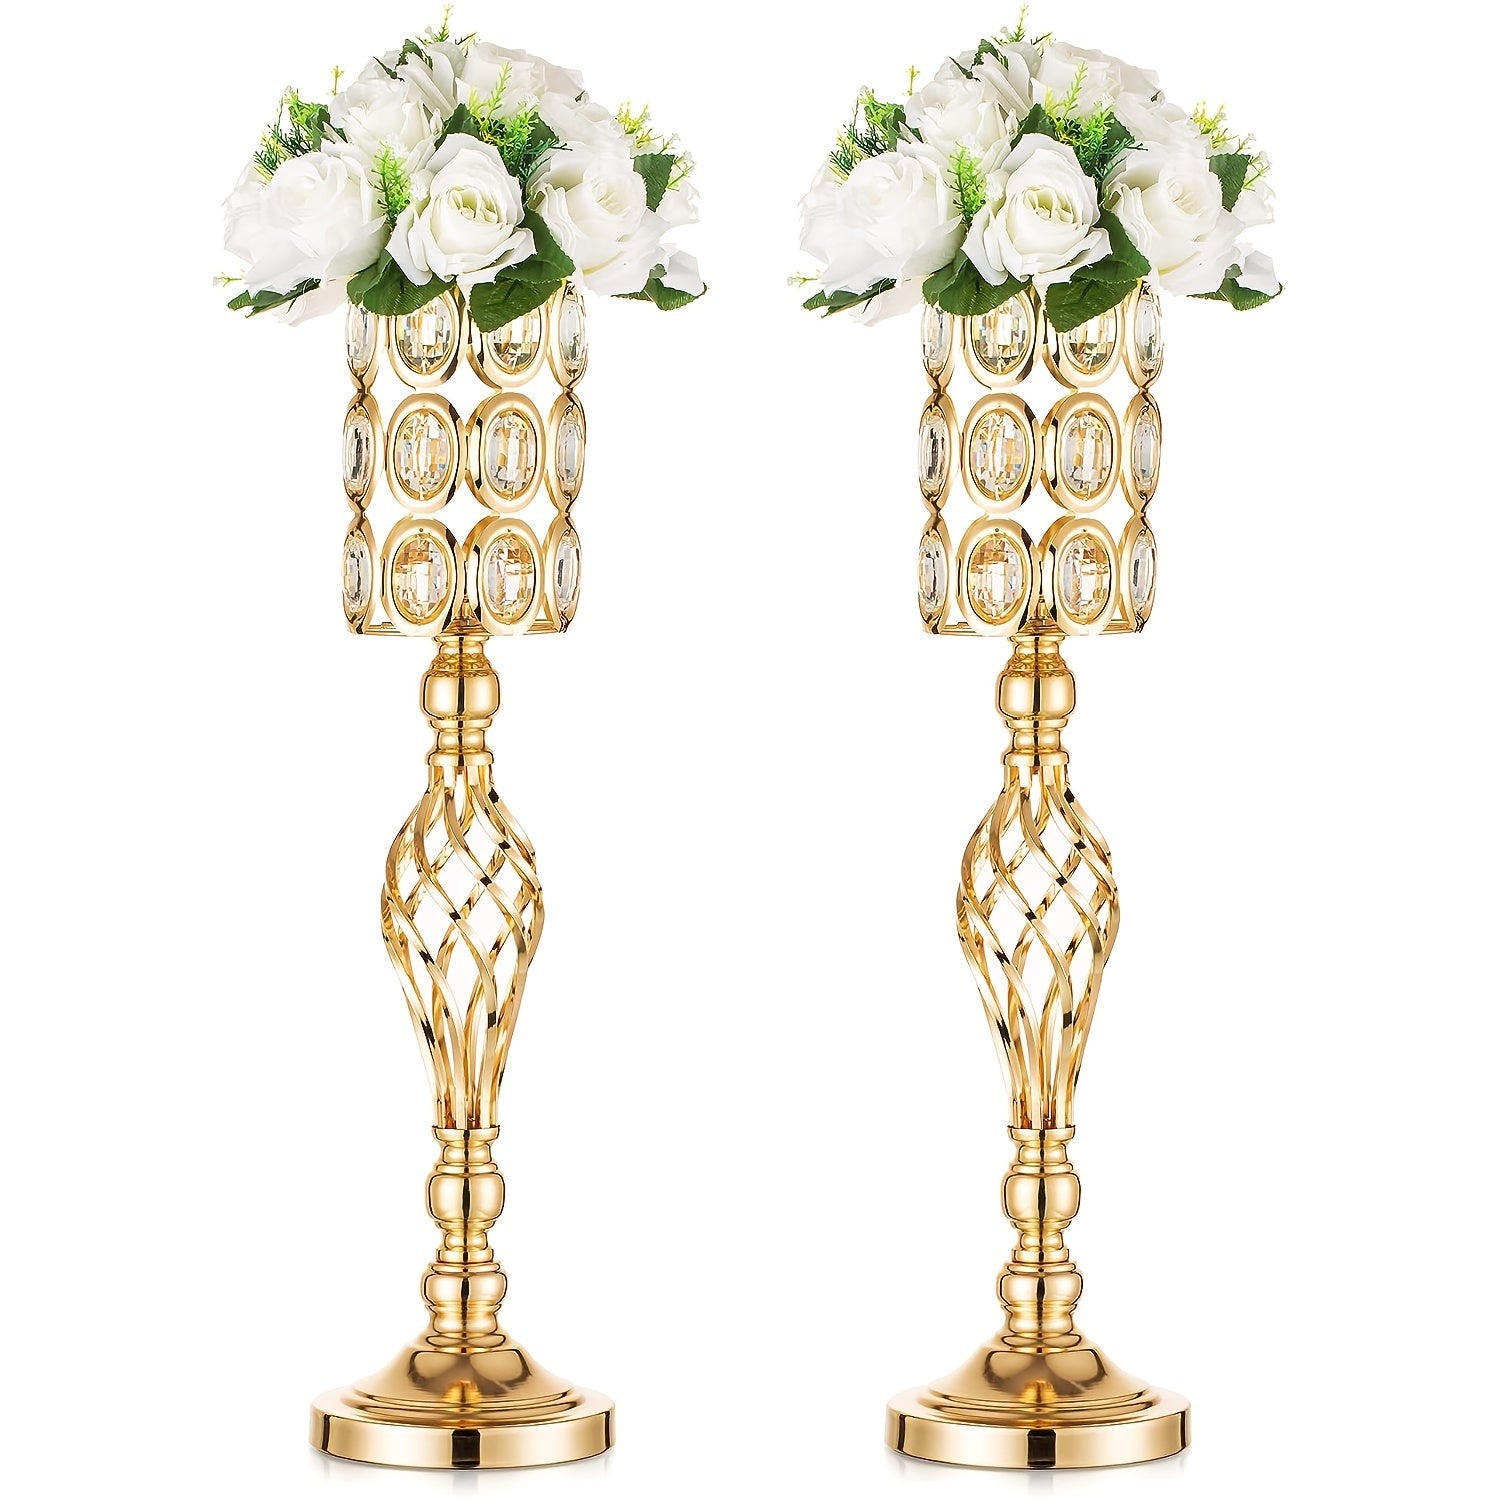 2pcs, Golden Silvery Vases For Centerpieces, Tall Vases For Centerpieces With Bling Stones, Wedding Centerpieces For Tables, Metal Flower Stand For Wedding, Birthday, Event, Home Decor